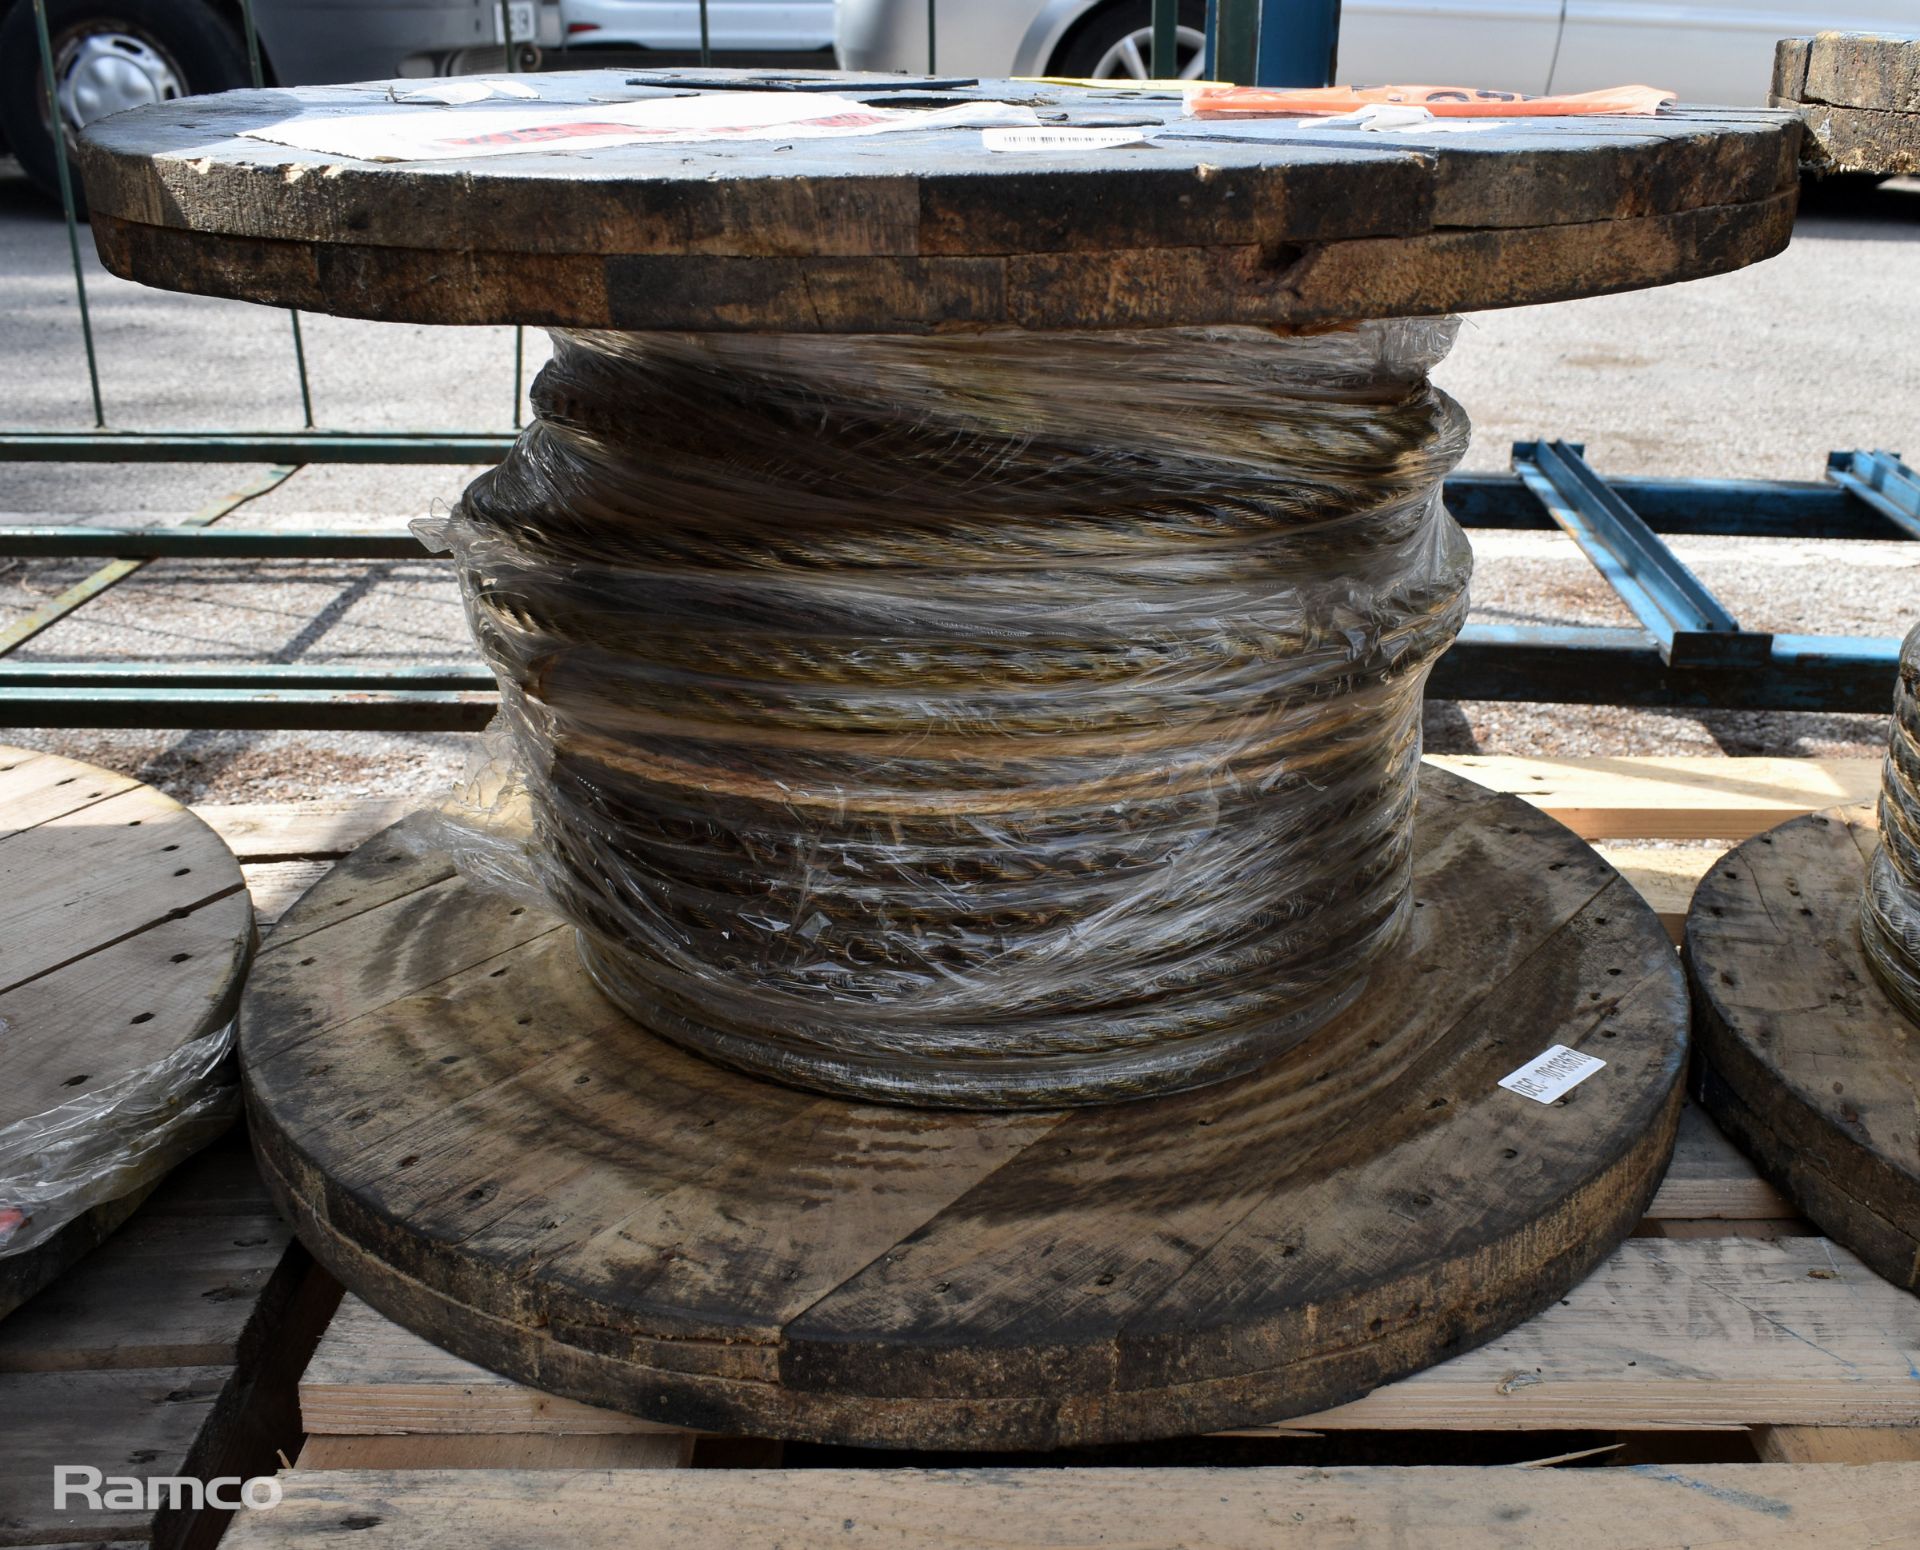 24mm 6 strand galvanised steel wire rope reel - approx weight: 150kg - Image 3 of 3